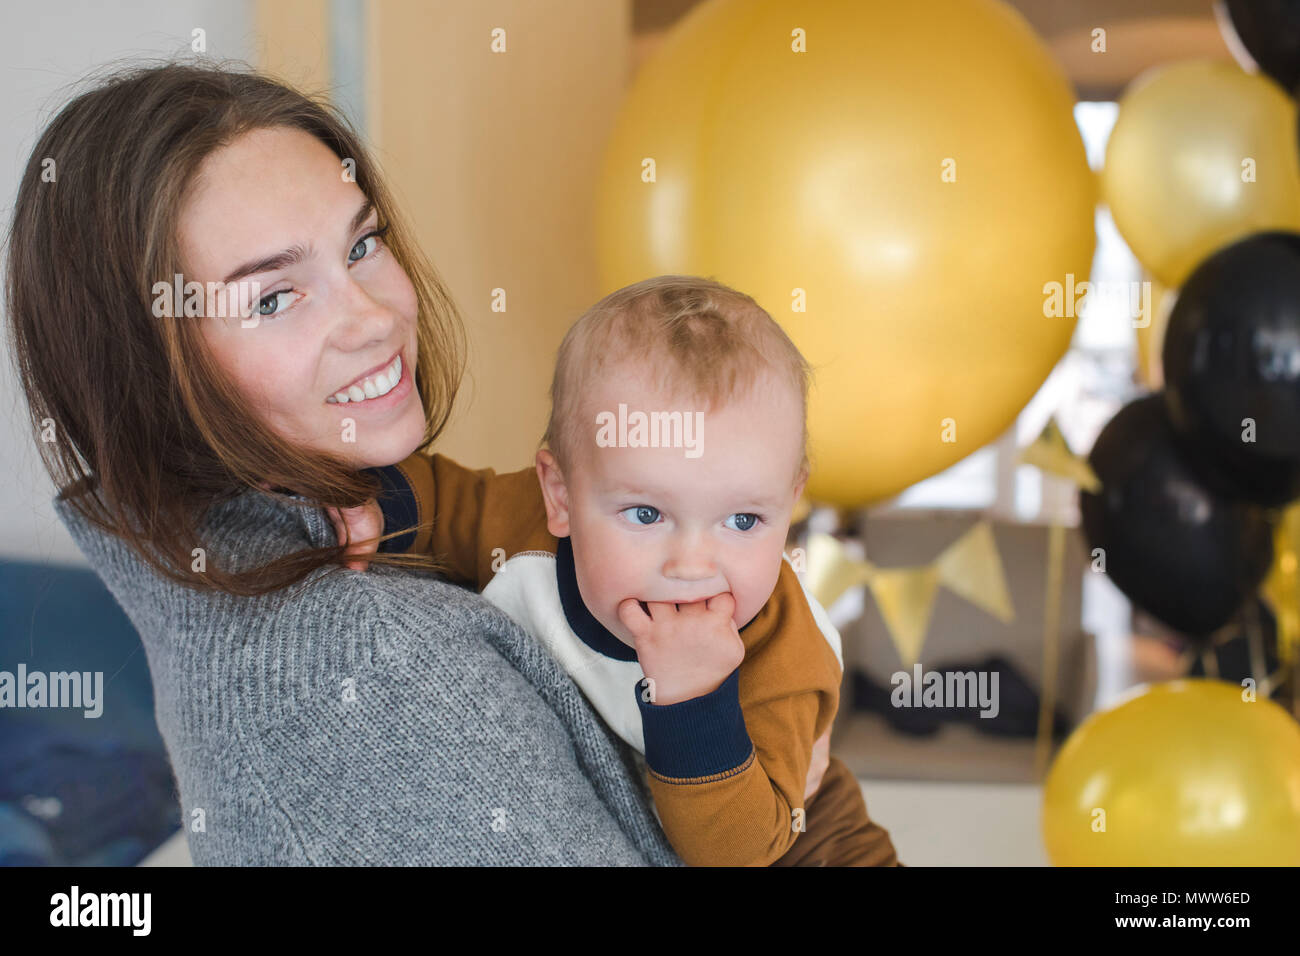 Cheerful woman with baby sur partie Banque D'Images